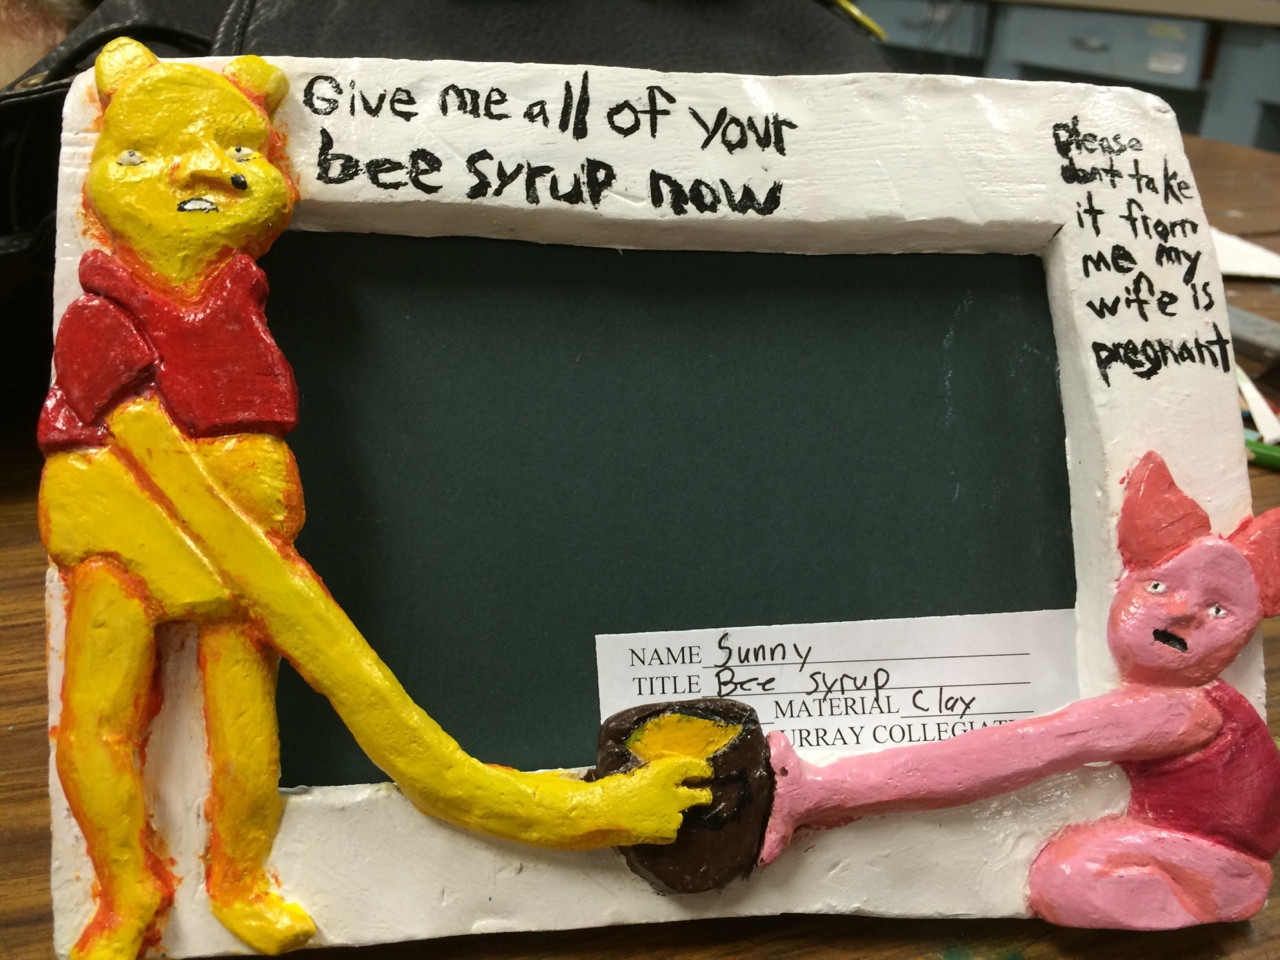 Came across this school art project. Pooh's honey problem is getting out of hand.